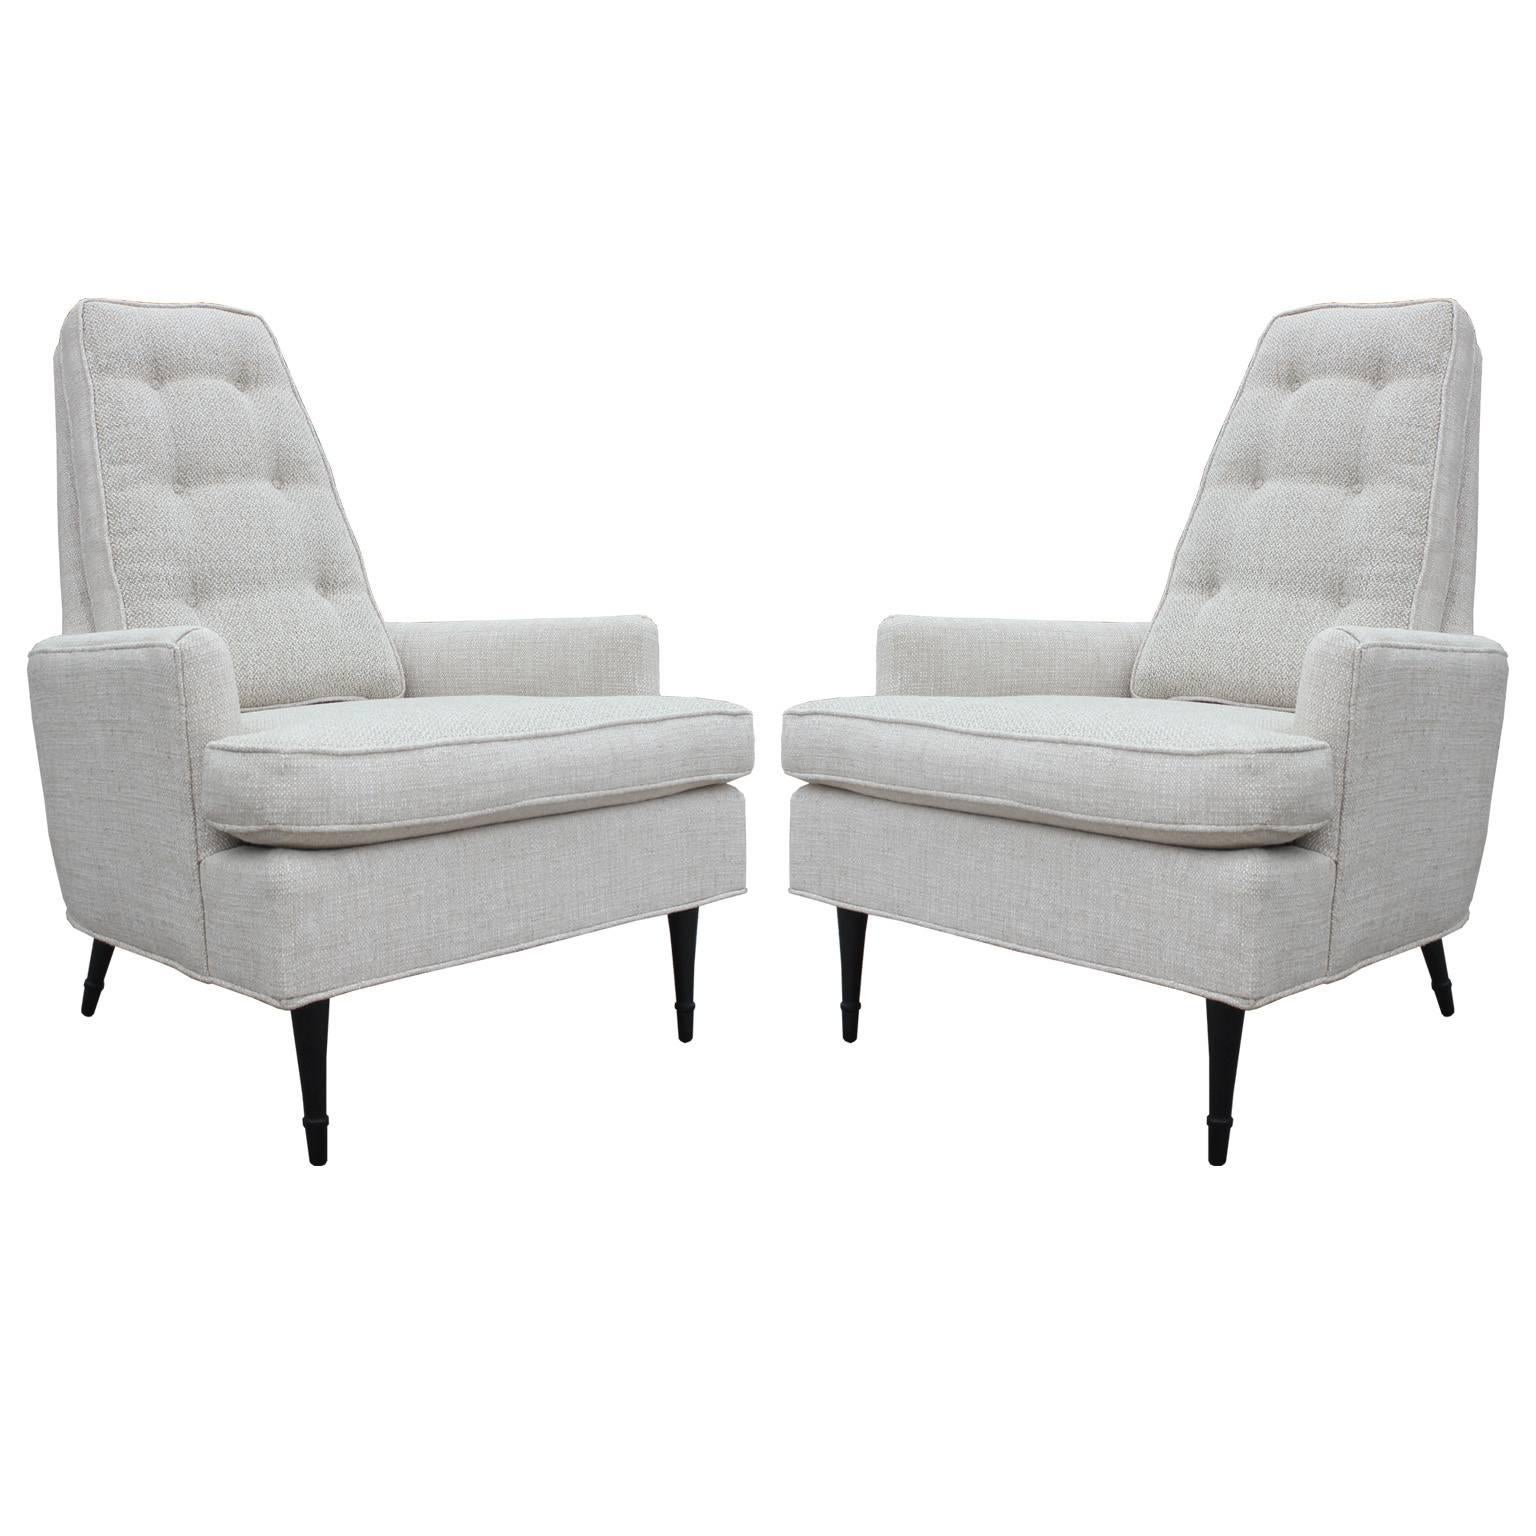 Pair of White High Barrel Back Modern Lounge Chairs with Ebony Finished Legs